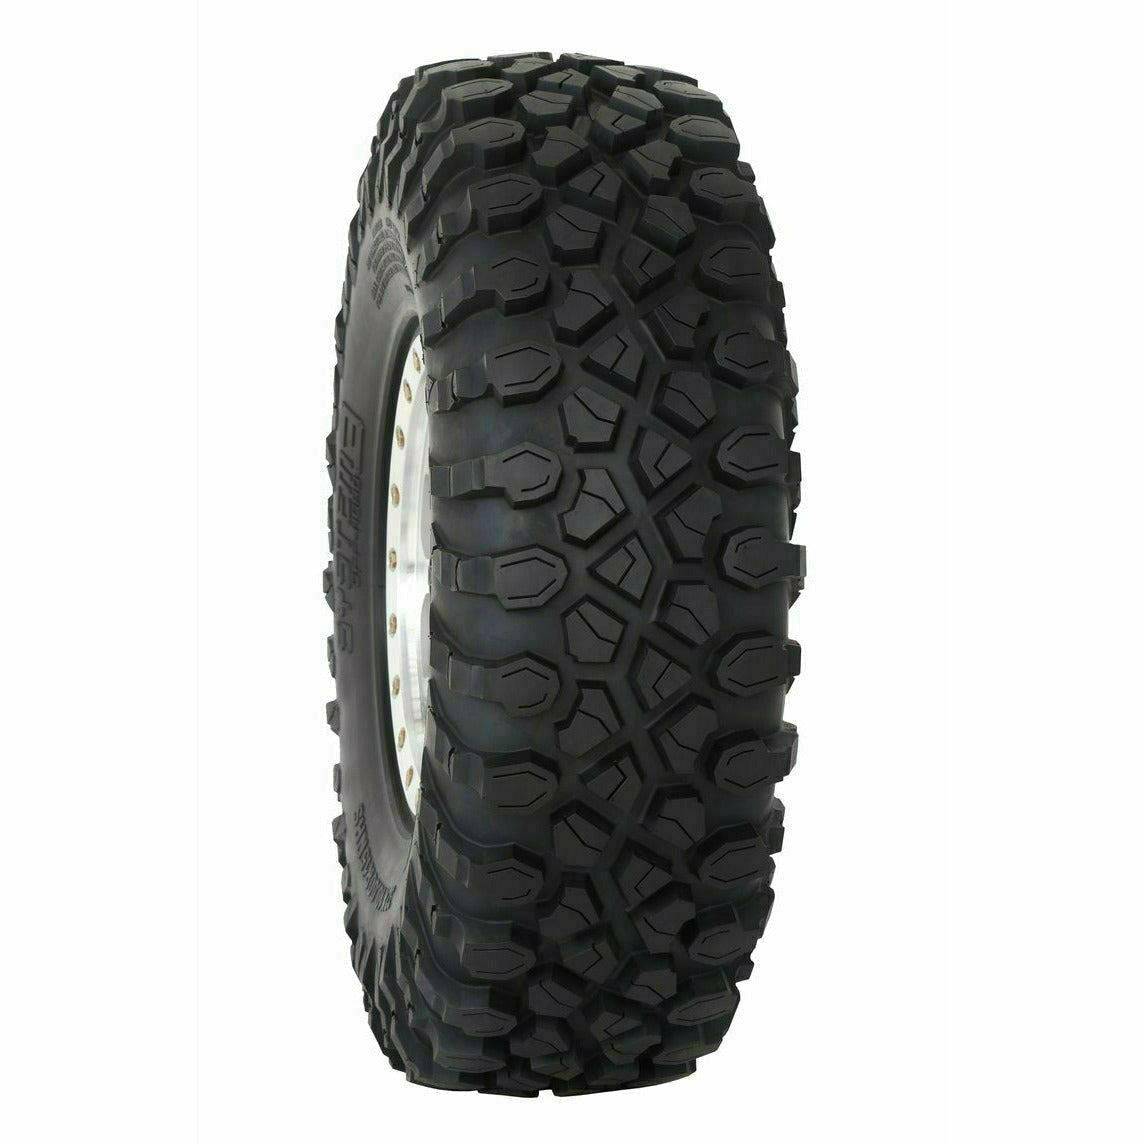 System 3 Off-Road XC450 Tire